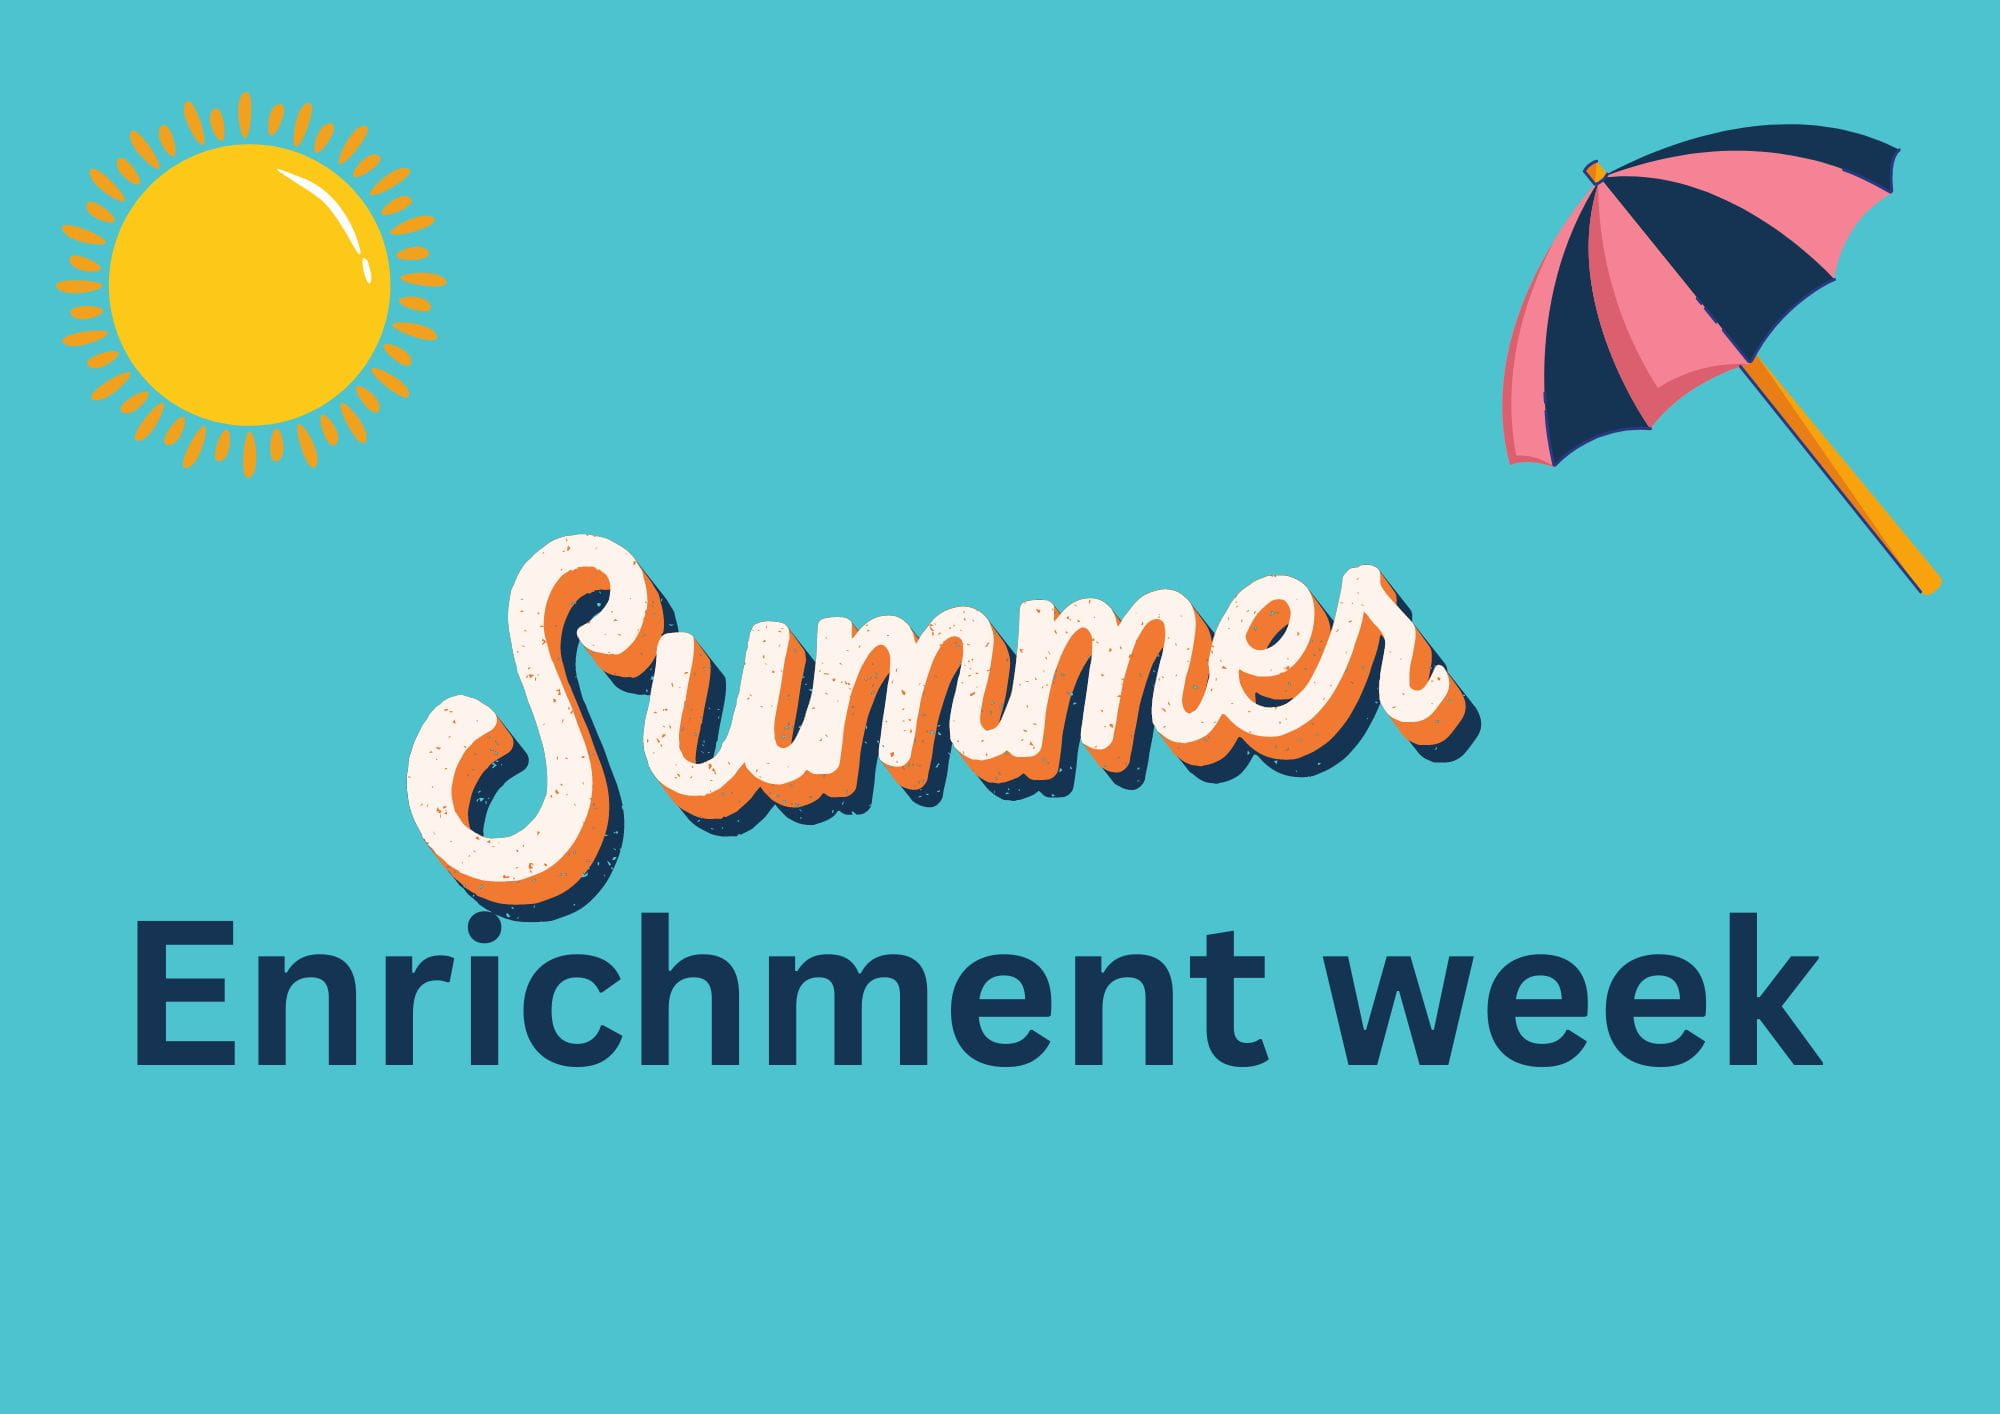 Enrichment Week for Secondary Students - Enrichment Week for Secondary Students